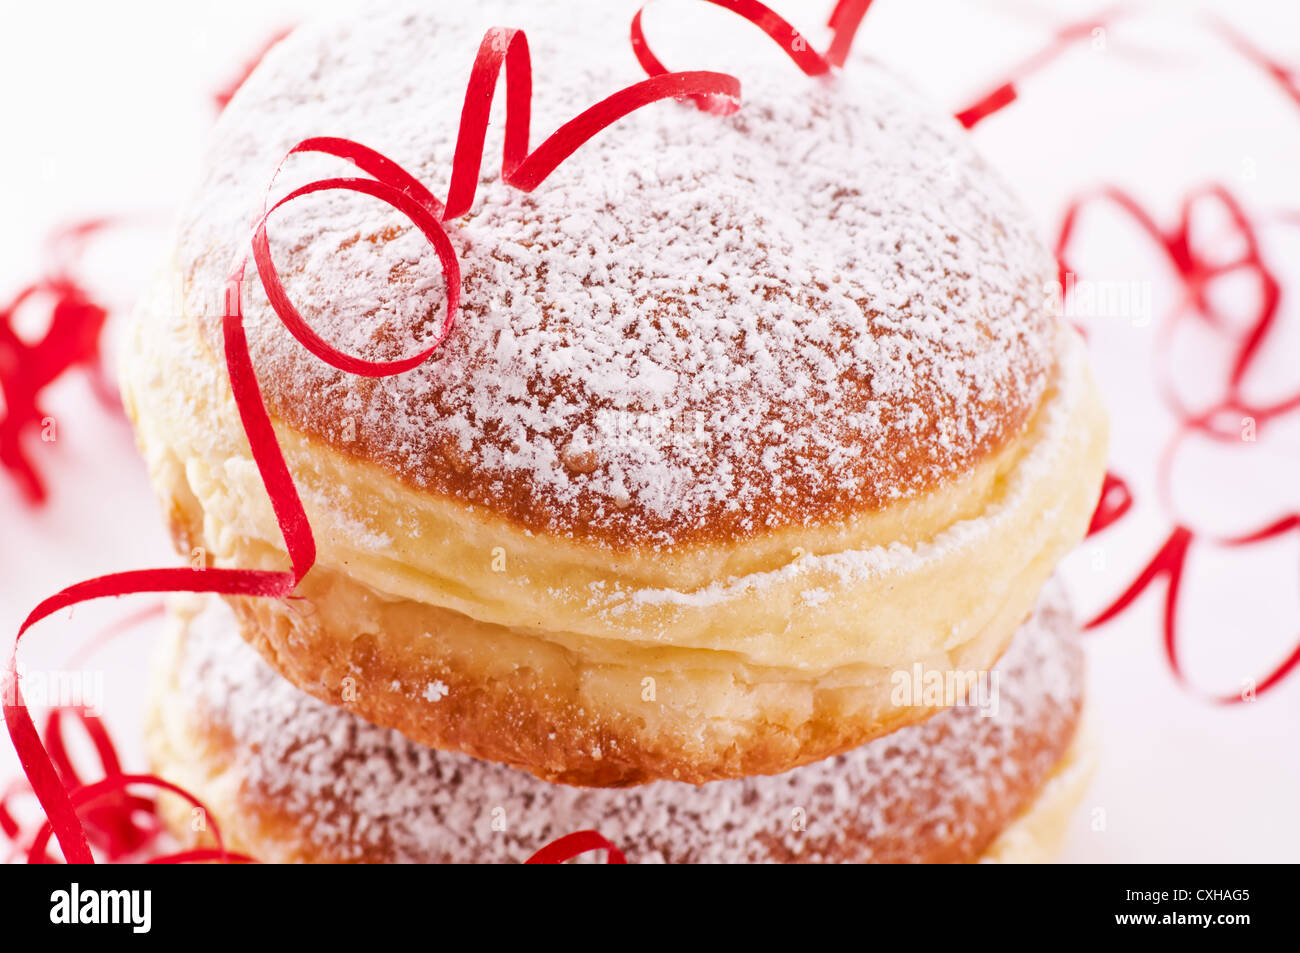 Krapfen with decoration as closeup Stock Photo